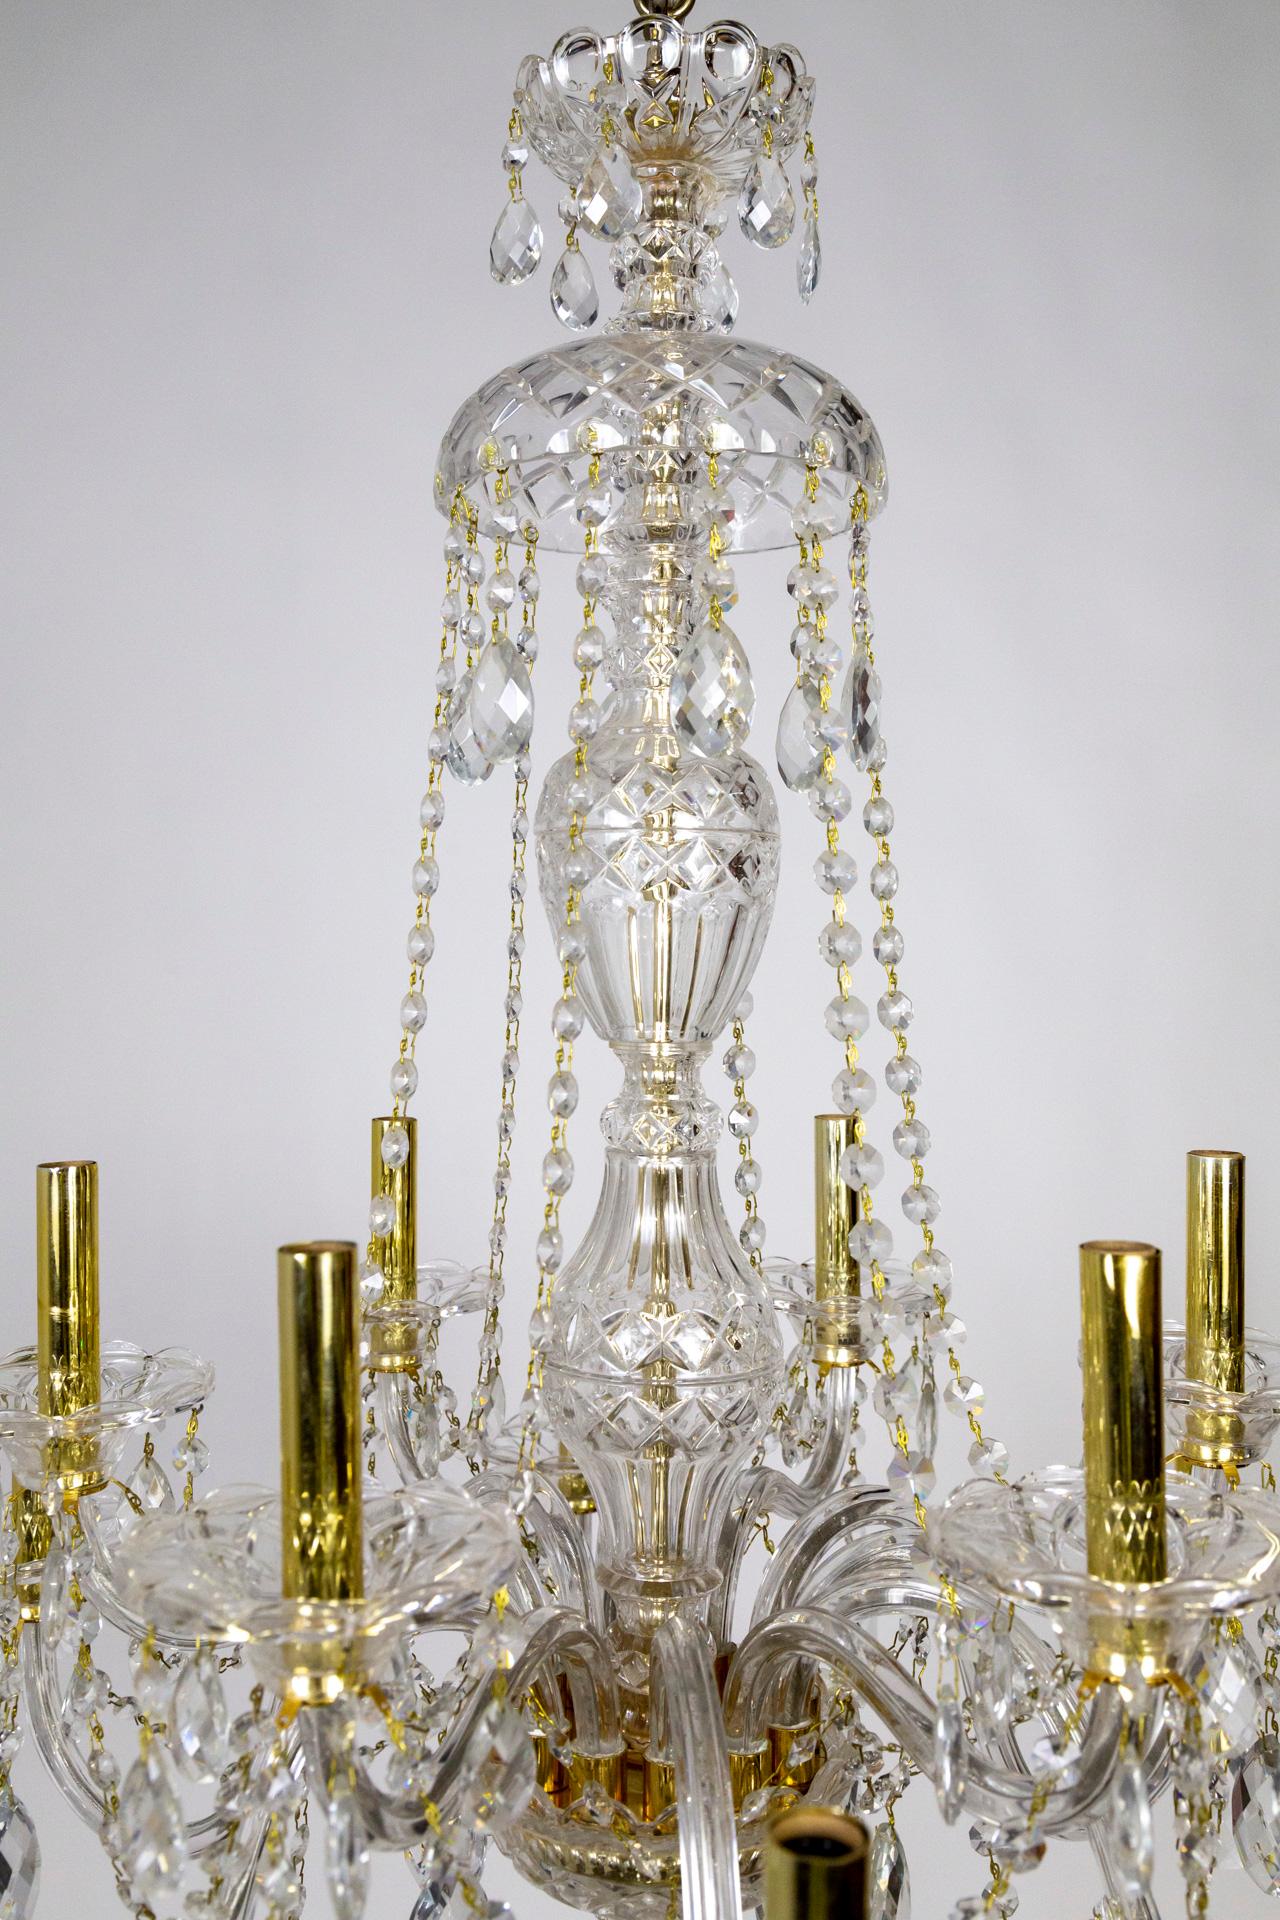 12-Light 2-Tier Bohemian Glass Chandelier w/ Gold Tone Candle Covers In Good Condition For Sale In San Francisco, CA